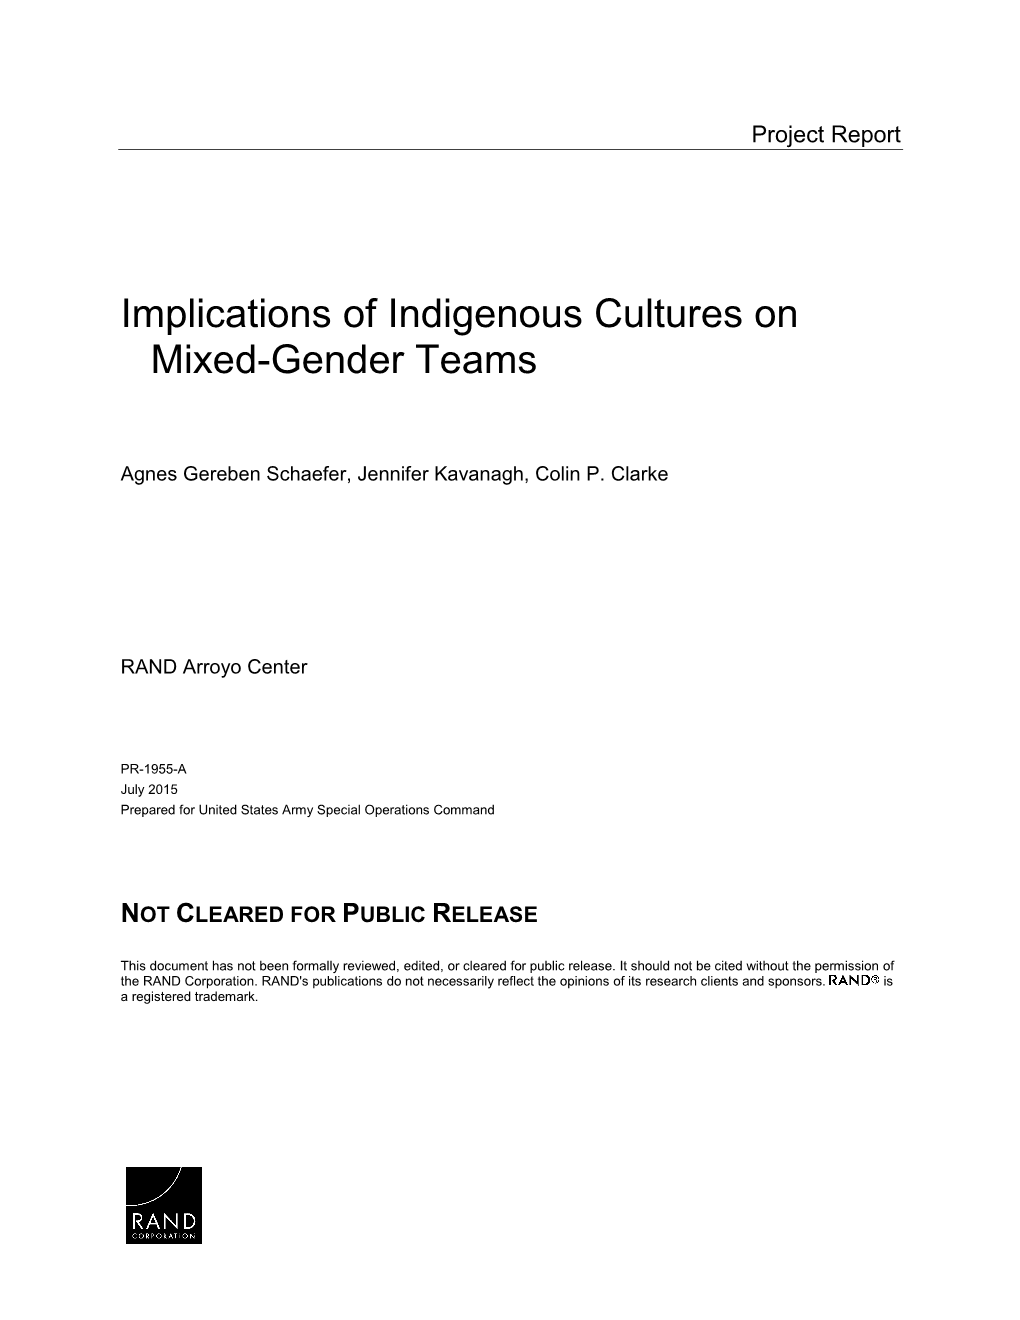 Implications of Indigenous Cultures on Mixed-Gender Teams